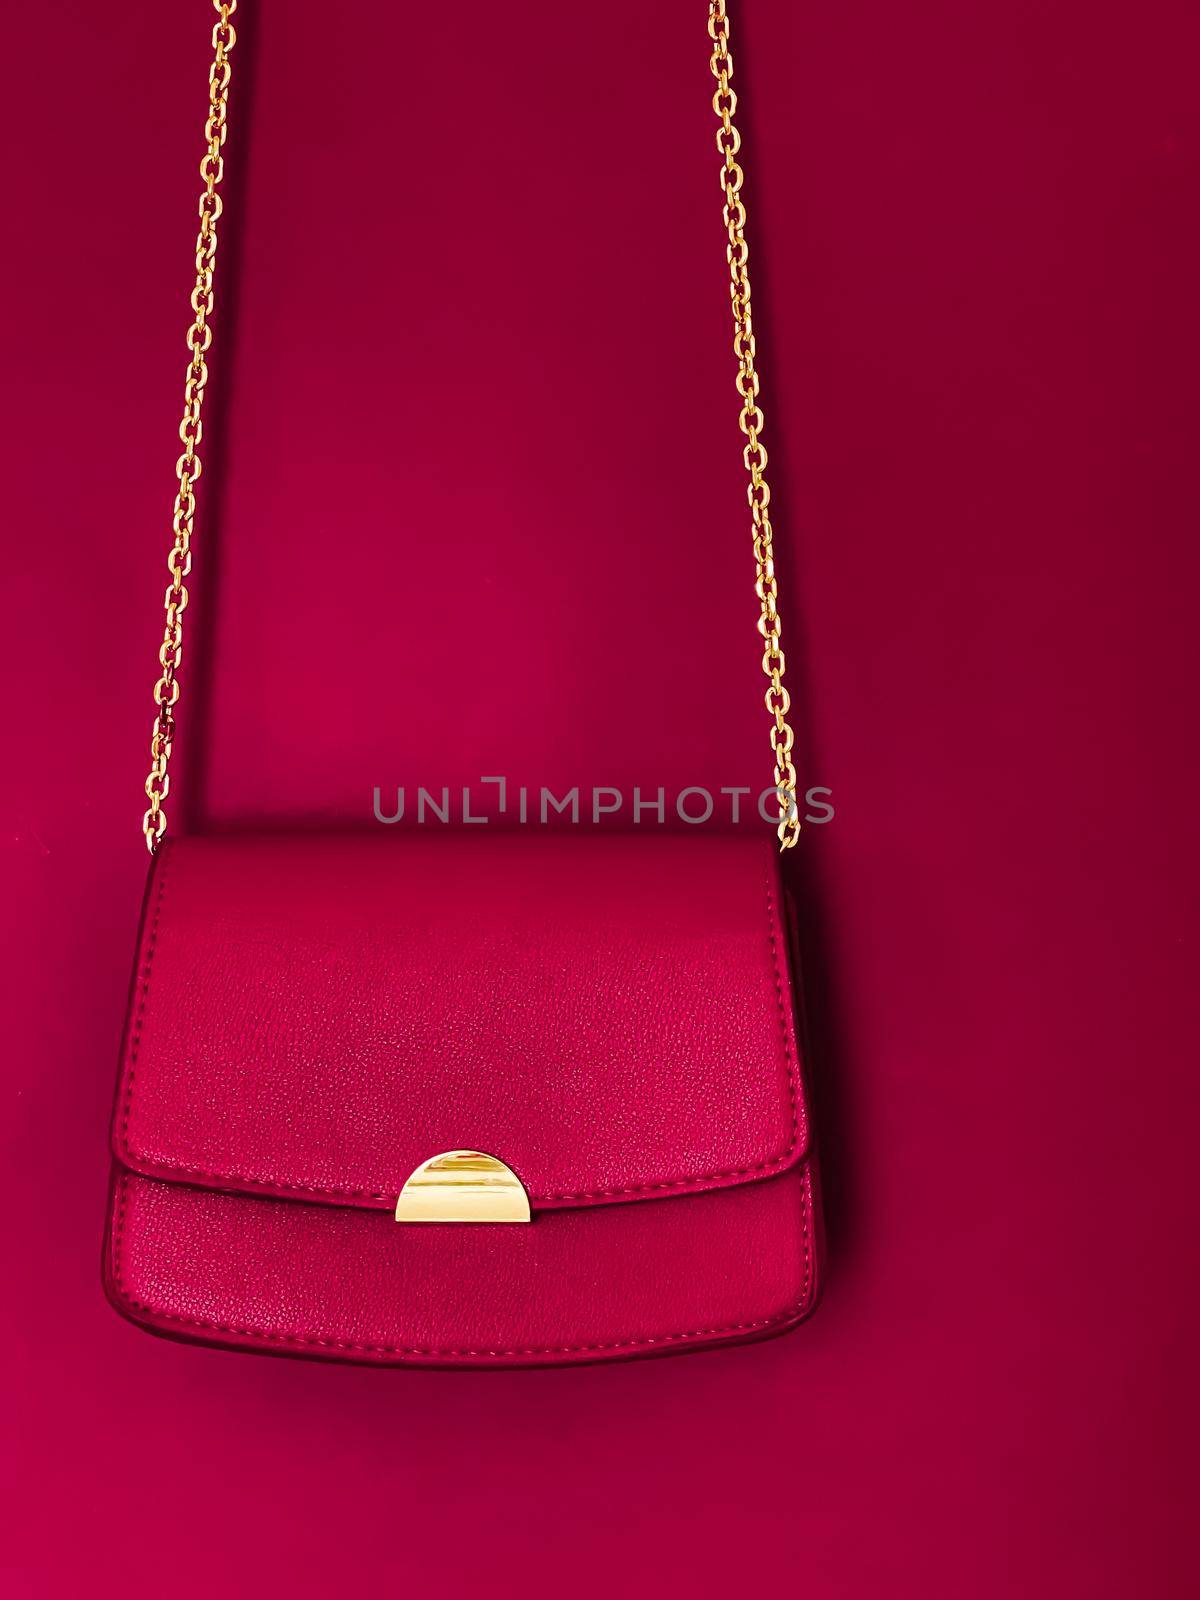 Pink fashionable leather purse with gold details as designer bag and stylish accessory, female fashion and luxury style handbag collection concept